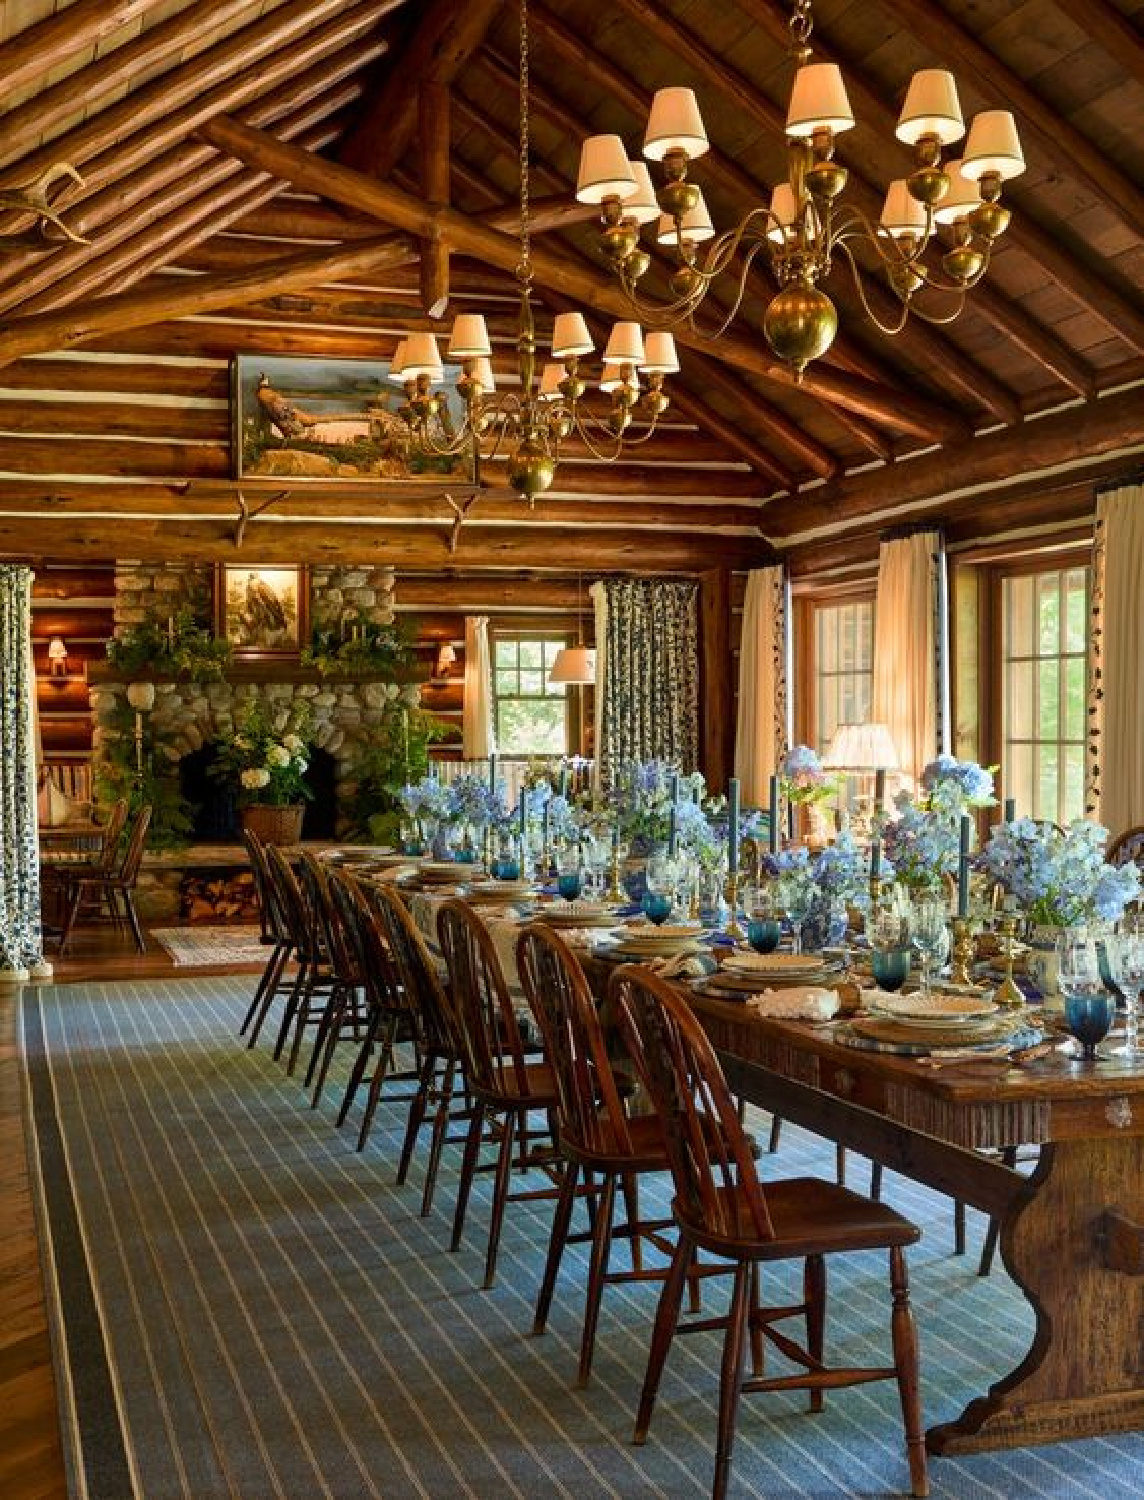 Rustic dining area in a Wisconsin cabin with chic cozy style in AD. #europeancottage #warmcozyinteriors #rusticelegance #europeancountry